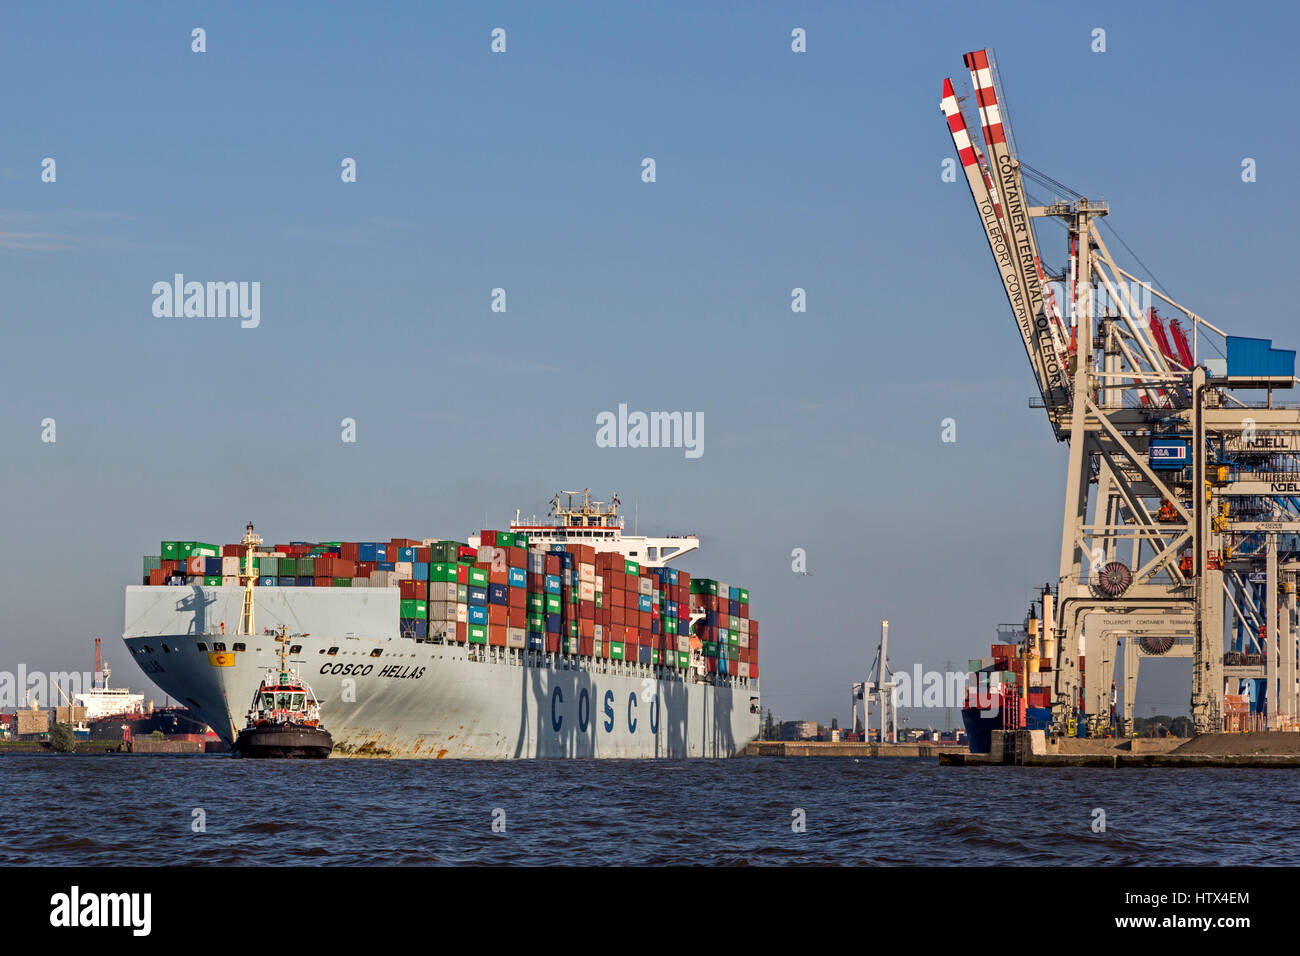 Container ship Cosco Hellas is pulled by tugboat, Port of Hamburg, Hamburg, Germany Stock Photo